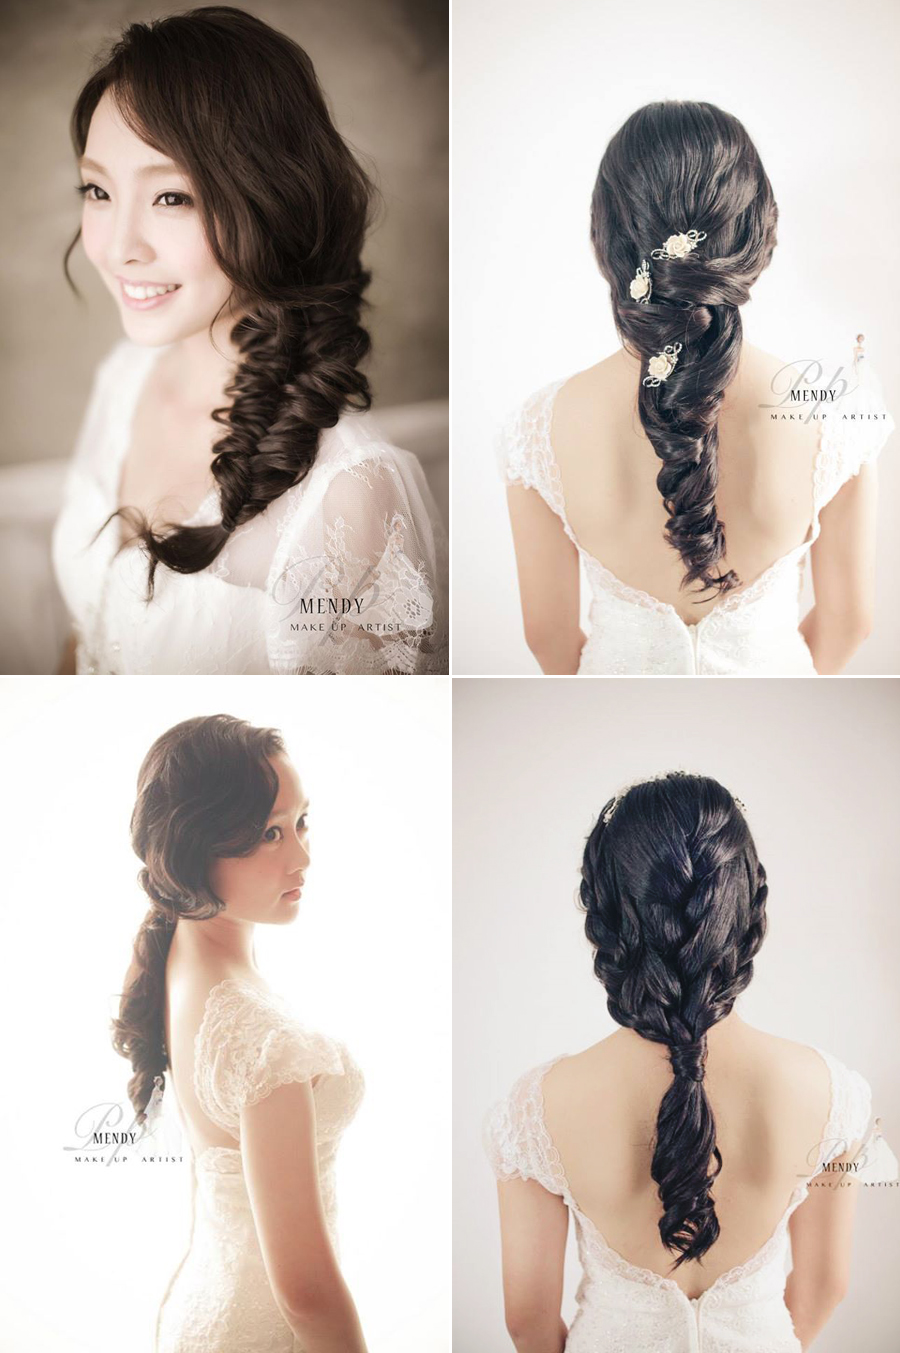 Effortless natural beauty for long hair brides!